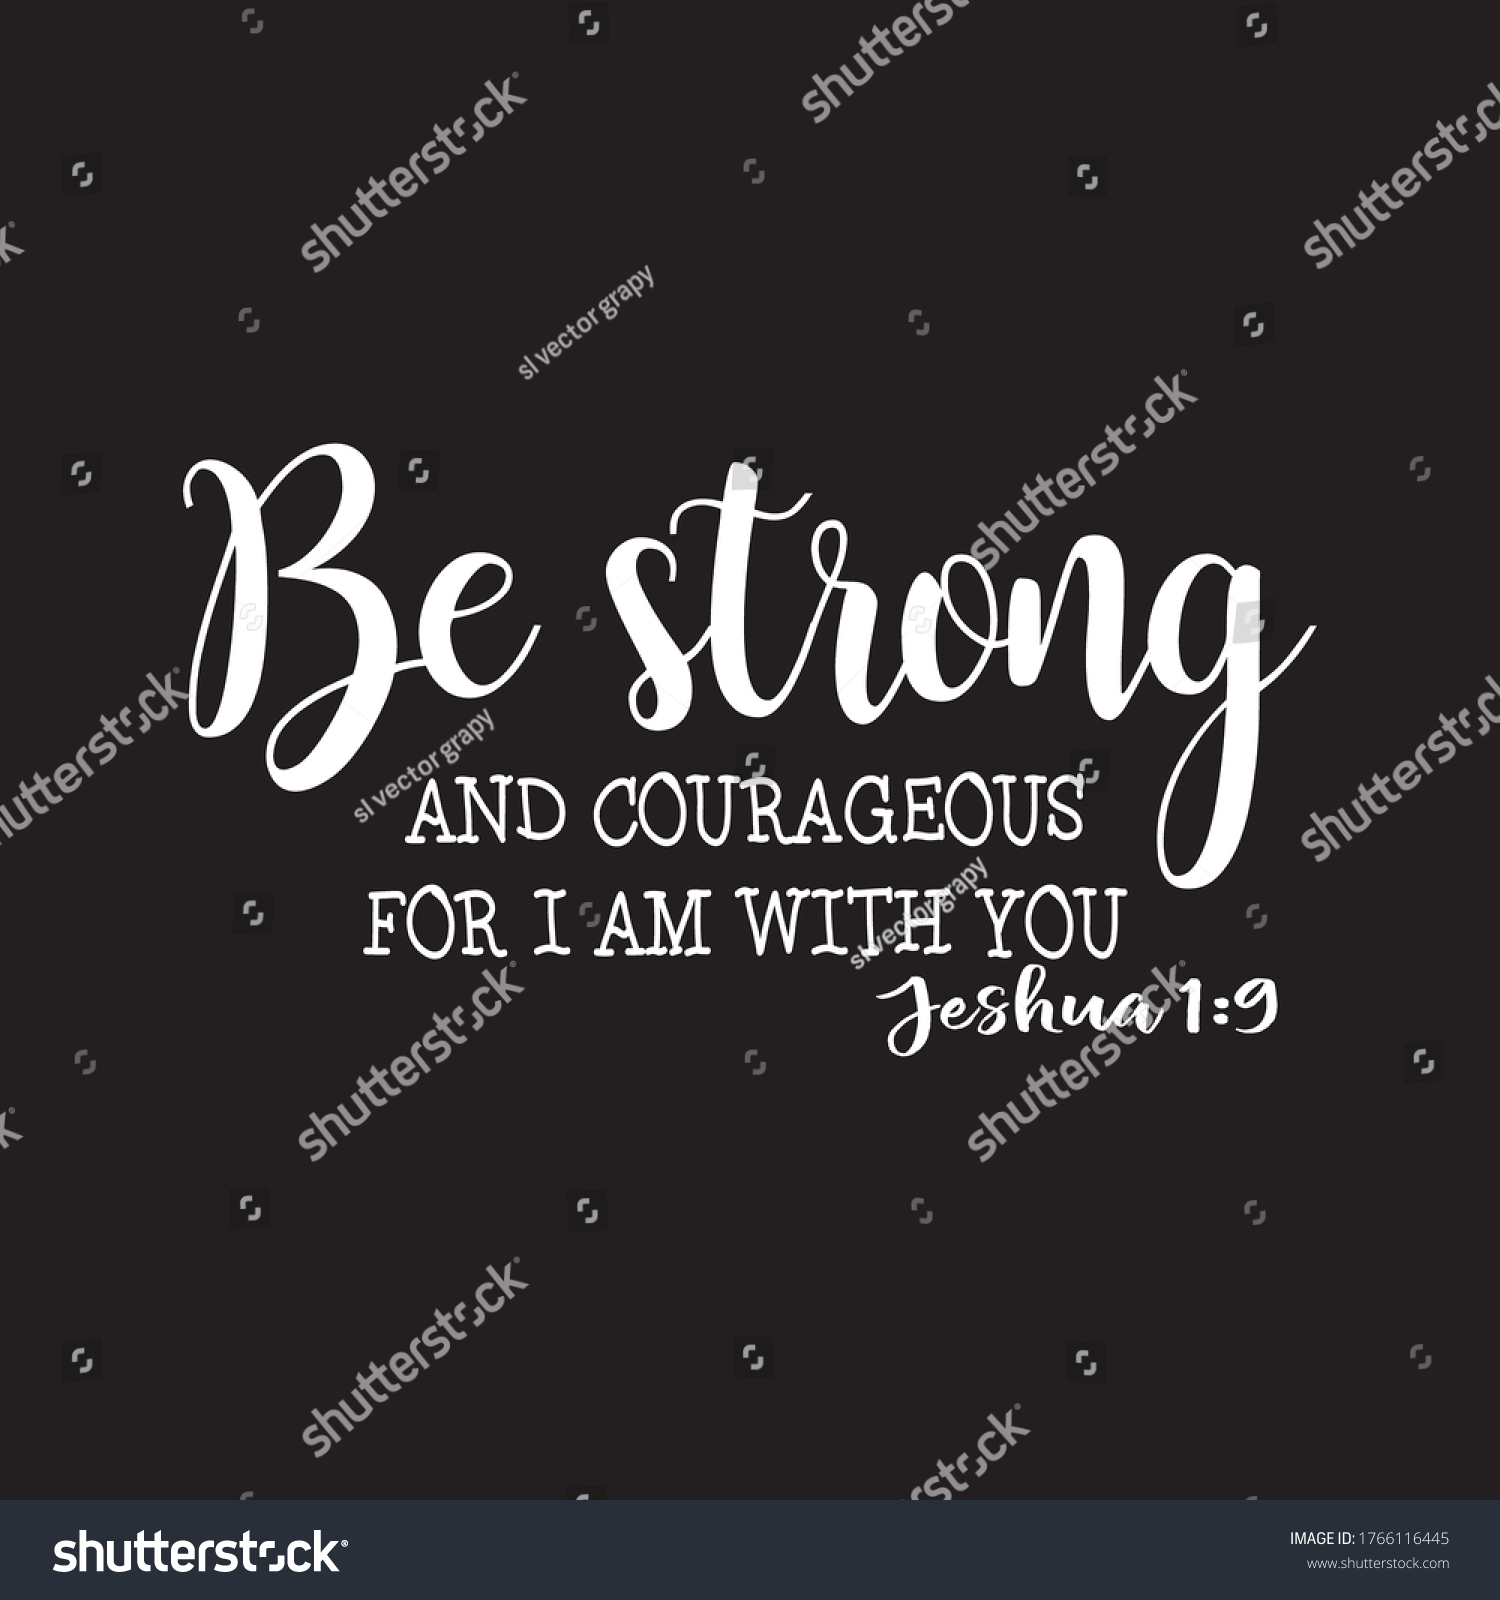 SVG of be strong and courageous (joshua 1 : 9) tshirt design vector back background  svg